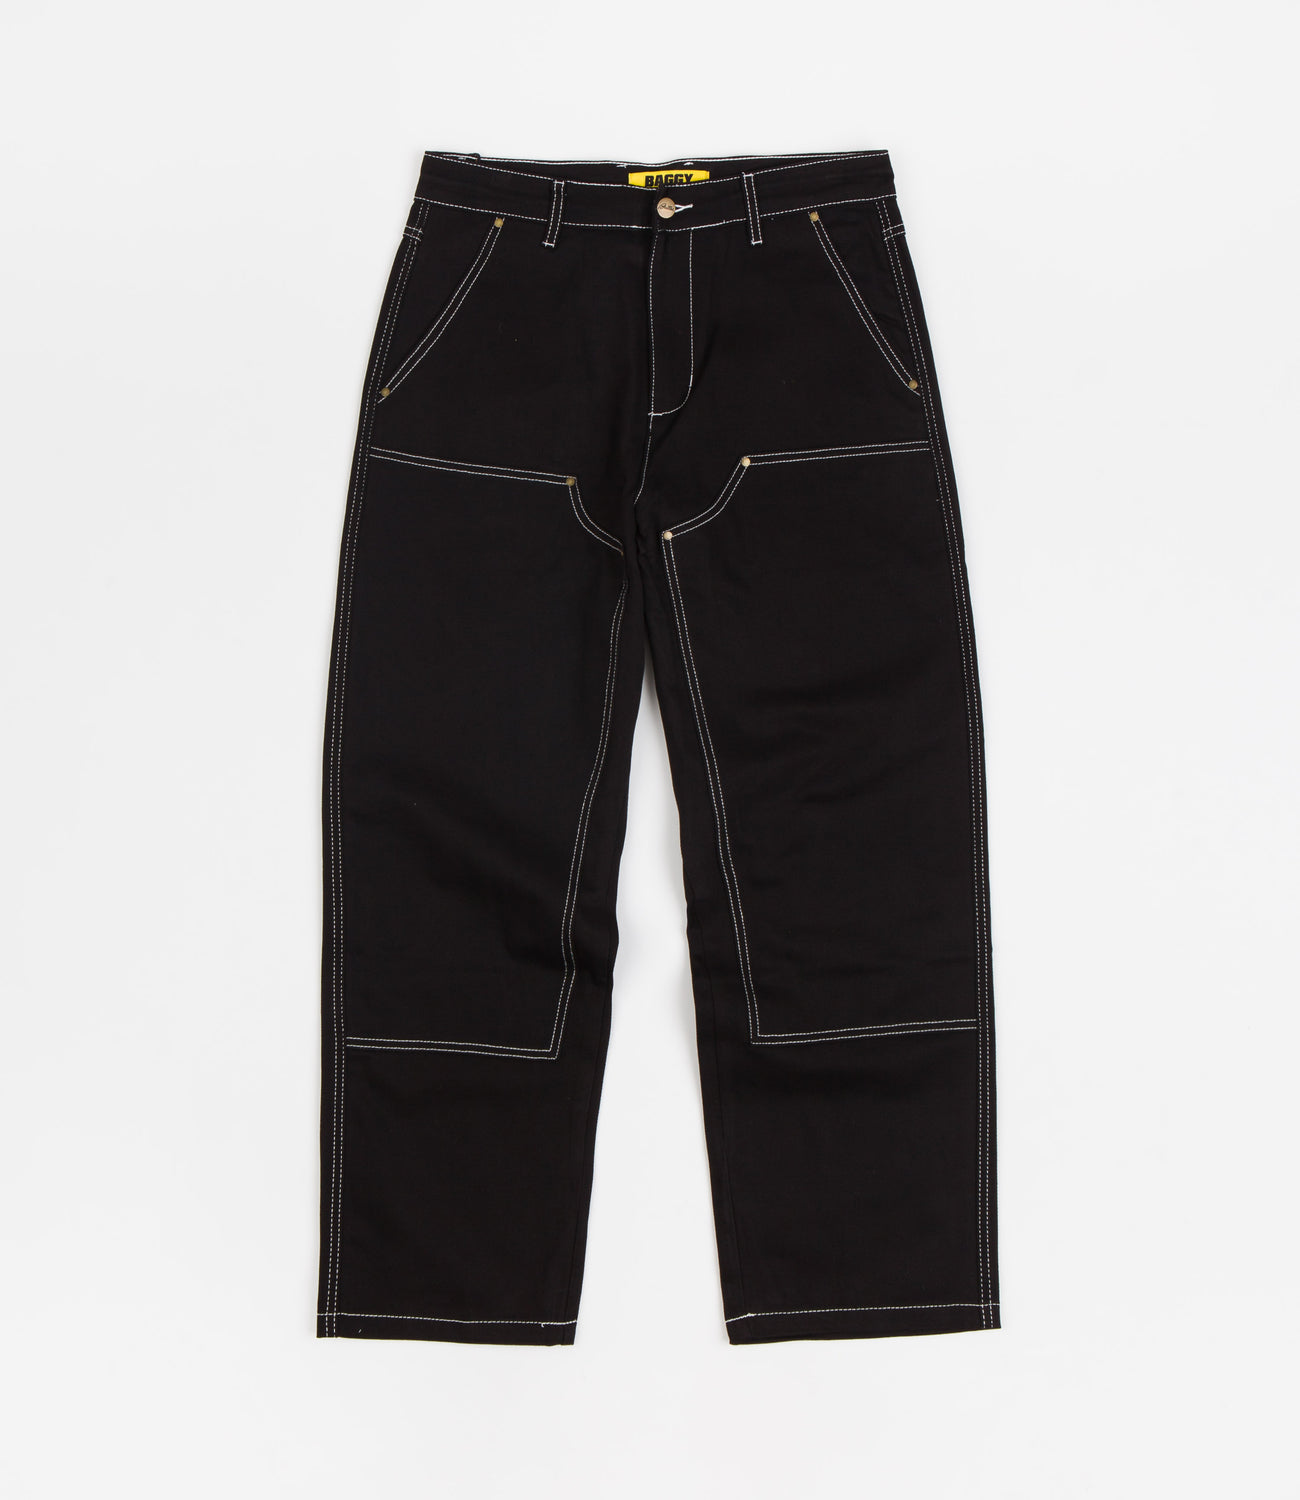 W A N T S Double Buttons Baggy Pants - Black on Garmentory